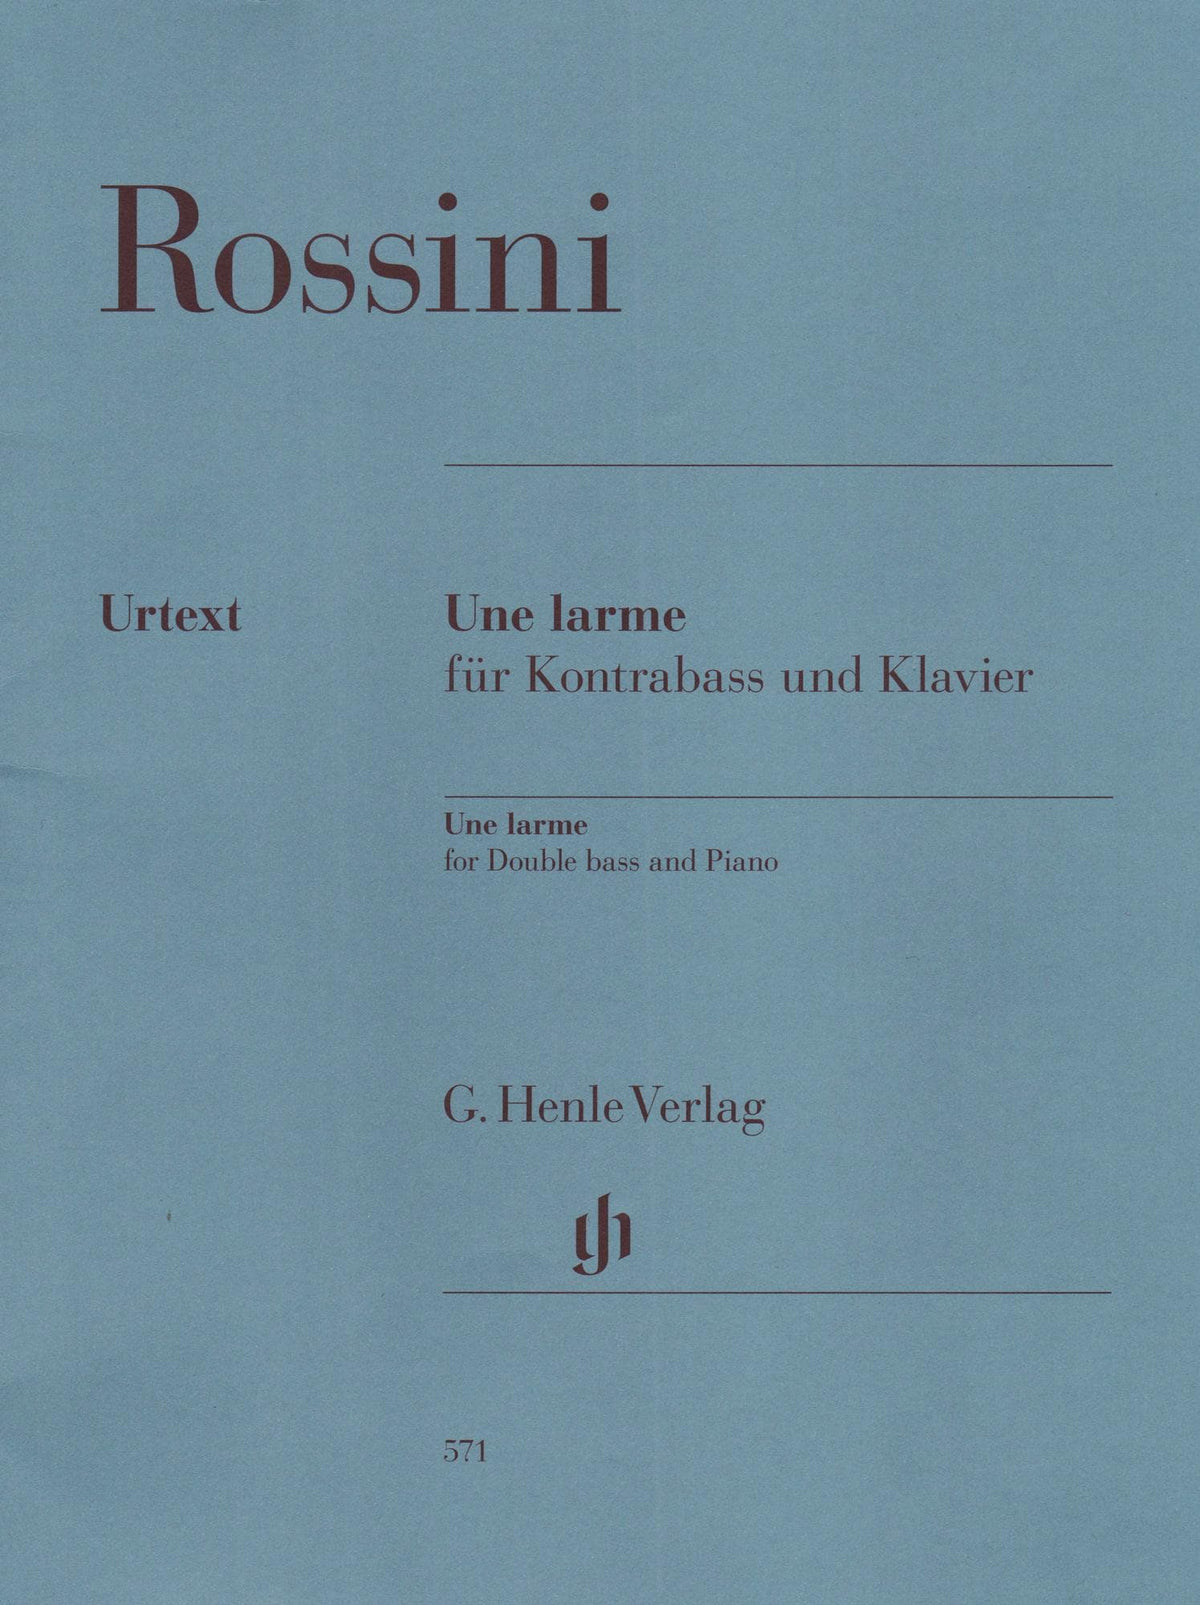 Rossini, G - Une larme - for Double Bass and Piano - G Henle Verlag URTEXT